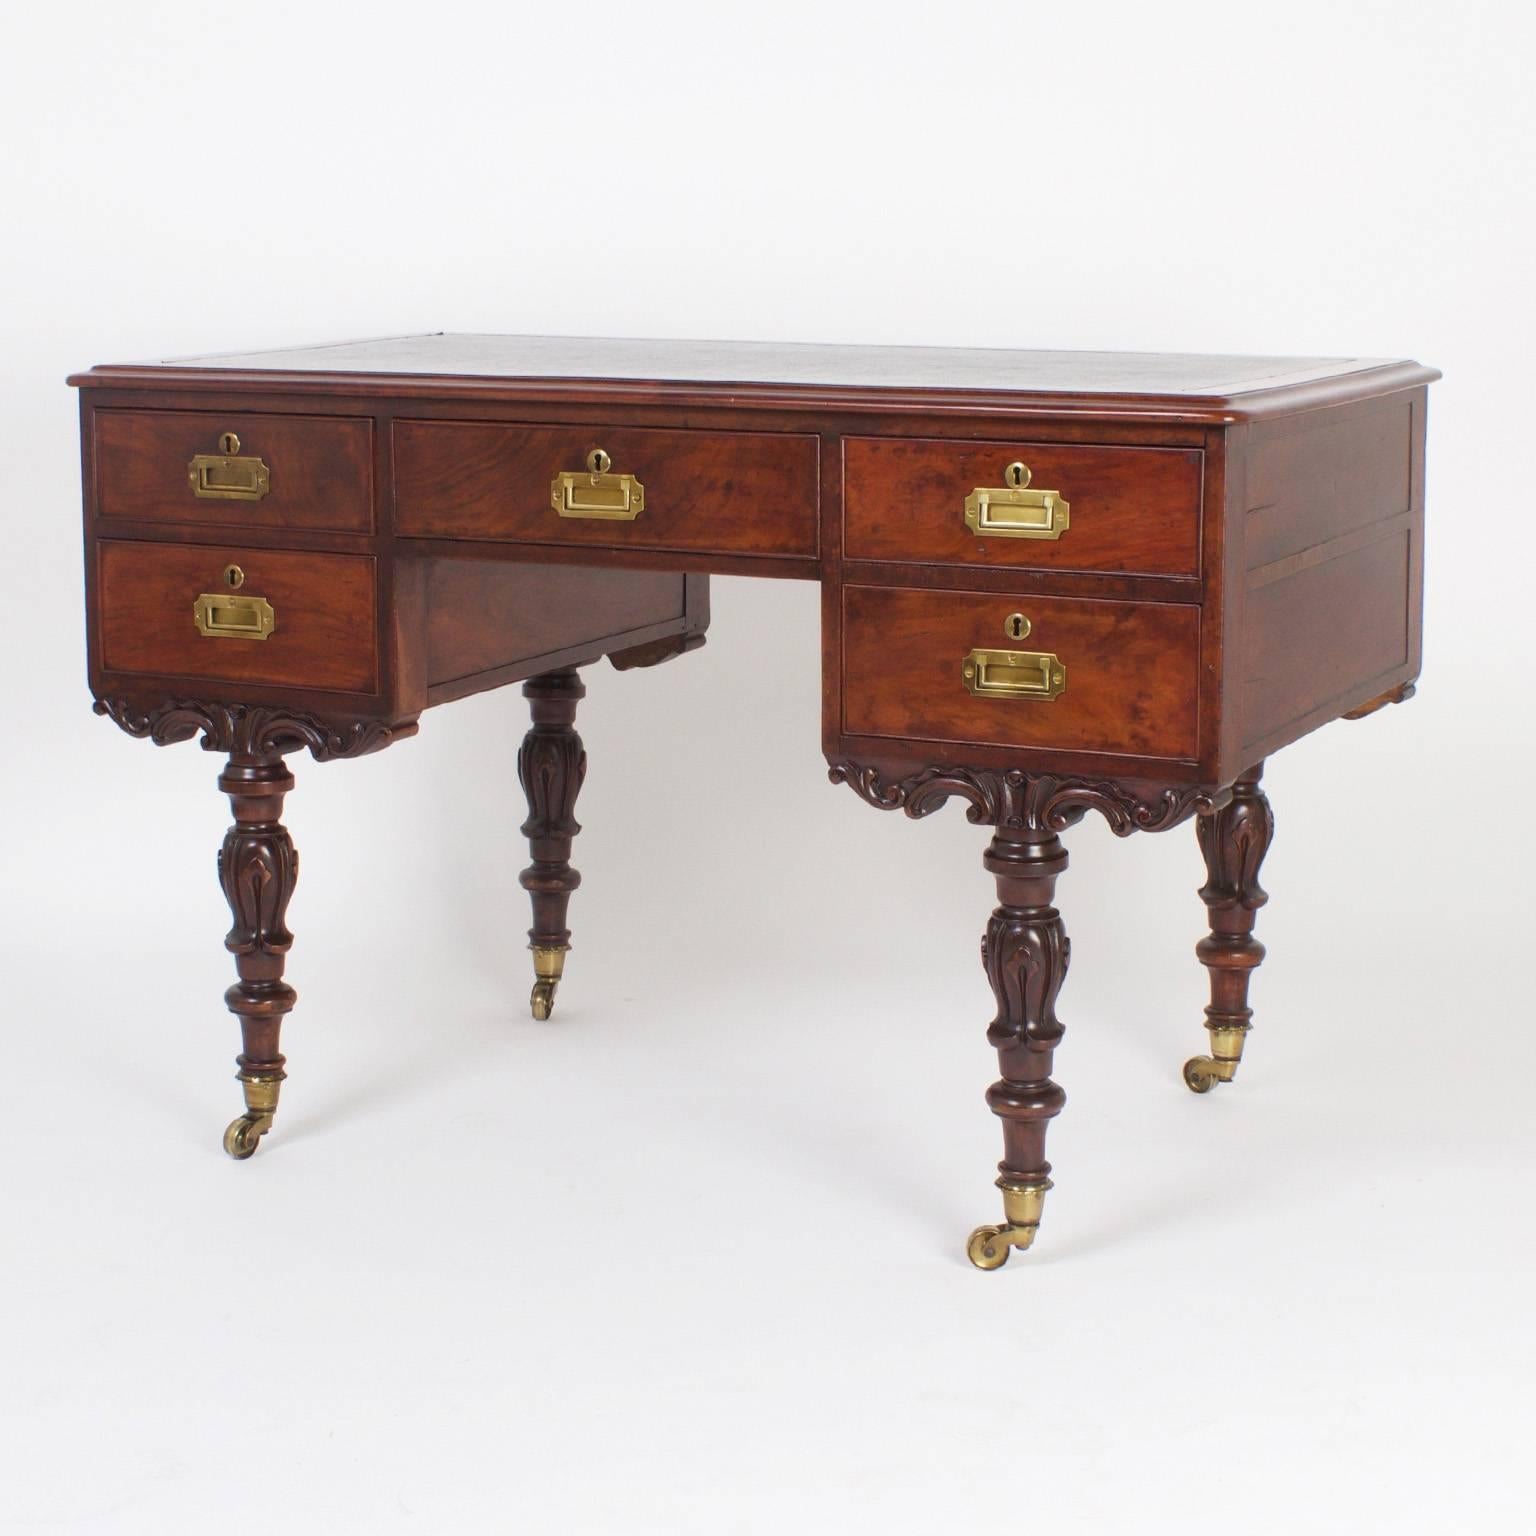 Rare and unusual Georgian style antique mahogany desk featuring a black leather top and inset campaign style brass hardware. The legs are off set from the corner and have a carved acanthus theme with lathe turned rings, all over brass casters.